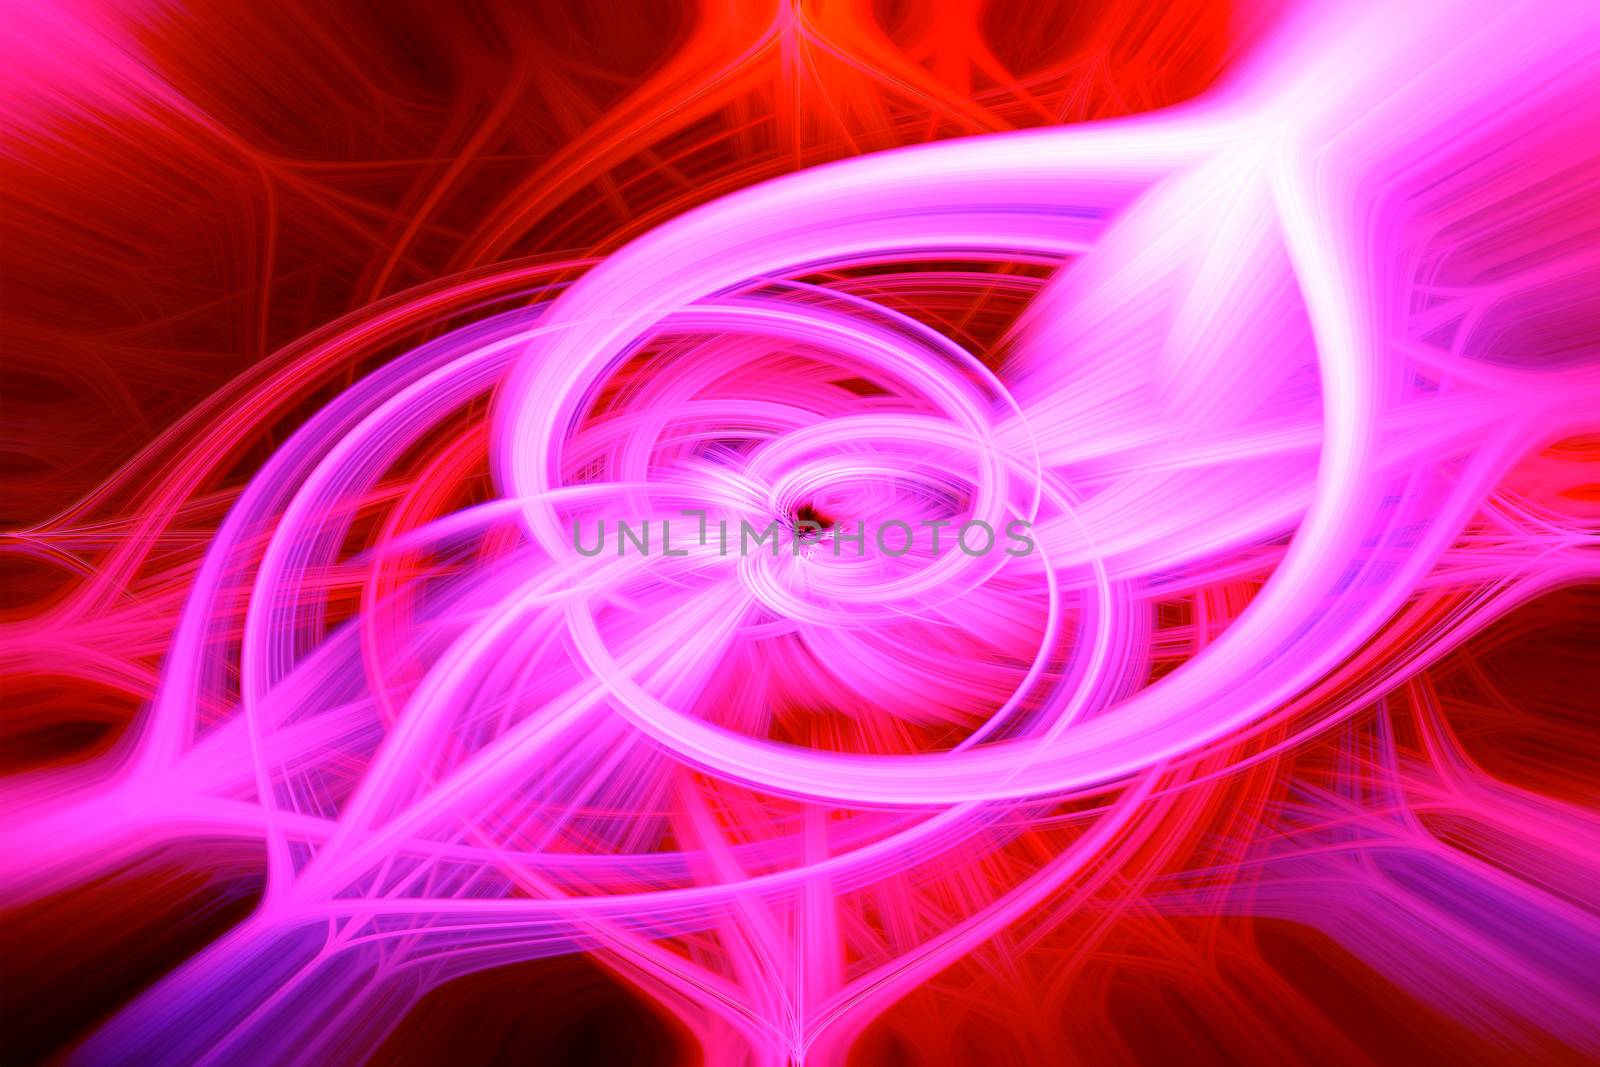 Beautiful abstract intertwined glowing 3d fibers forming a shape of sparkle, flame, flower, interlinked hearts. Purple, maroon, pink, and red colors. Illustration by DamantisZ